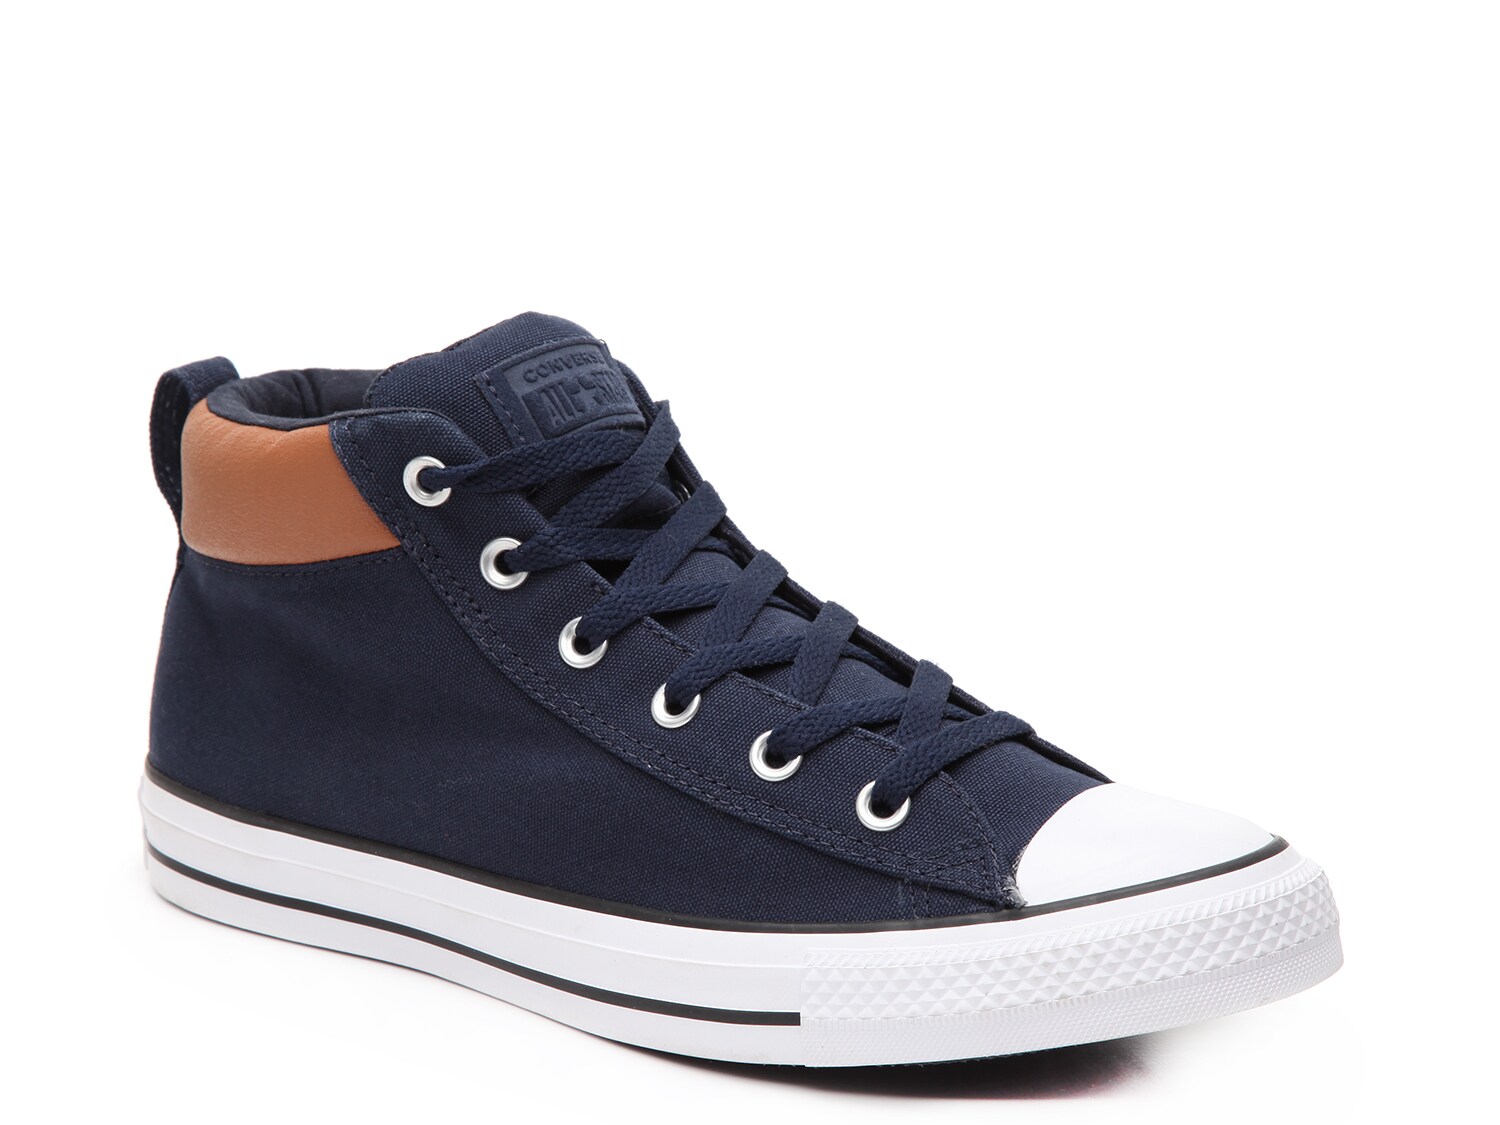 Converse Chuck Taylor All Star Mid Space Mid-Top Sneaker - Men's | DSW